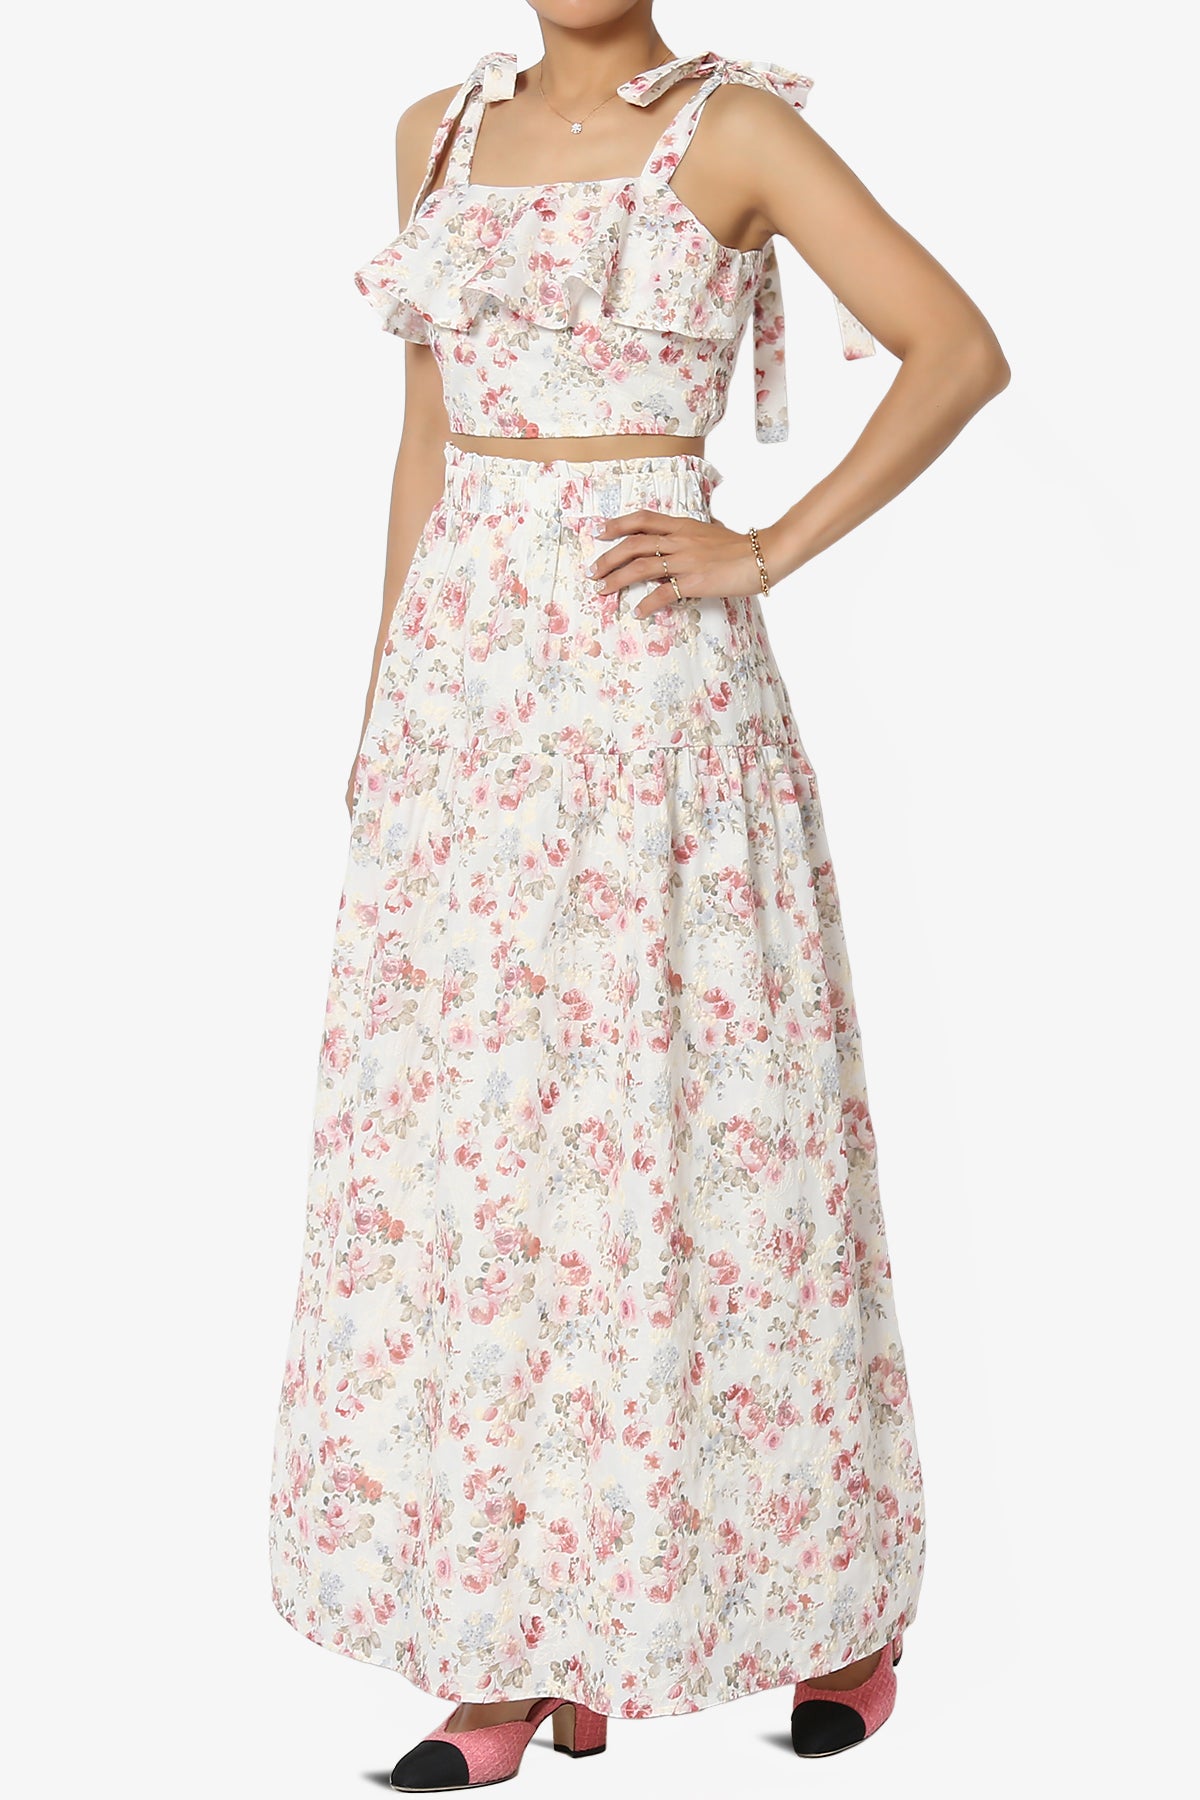 Twice Floral Ruffle Crop Top & A-Line Skirt Set in Pink